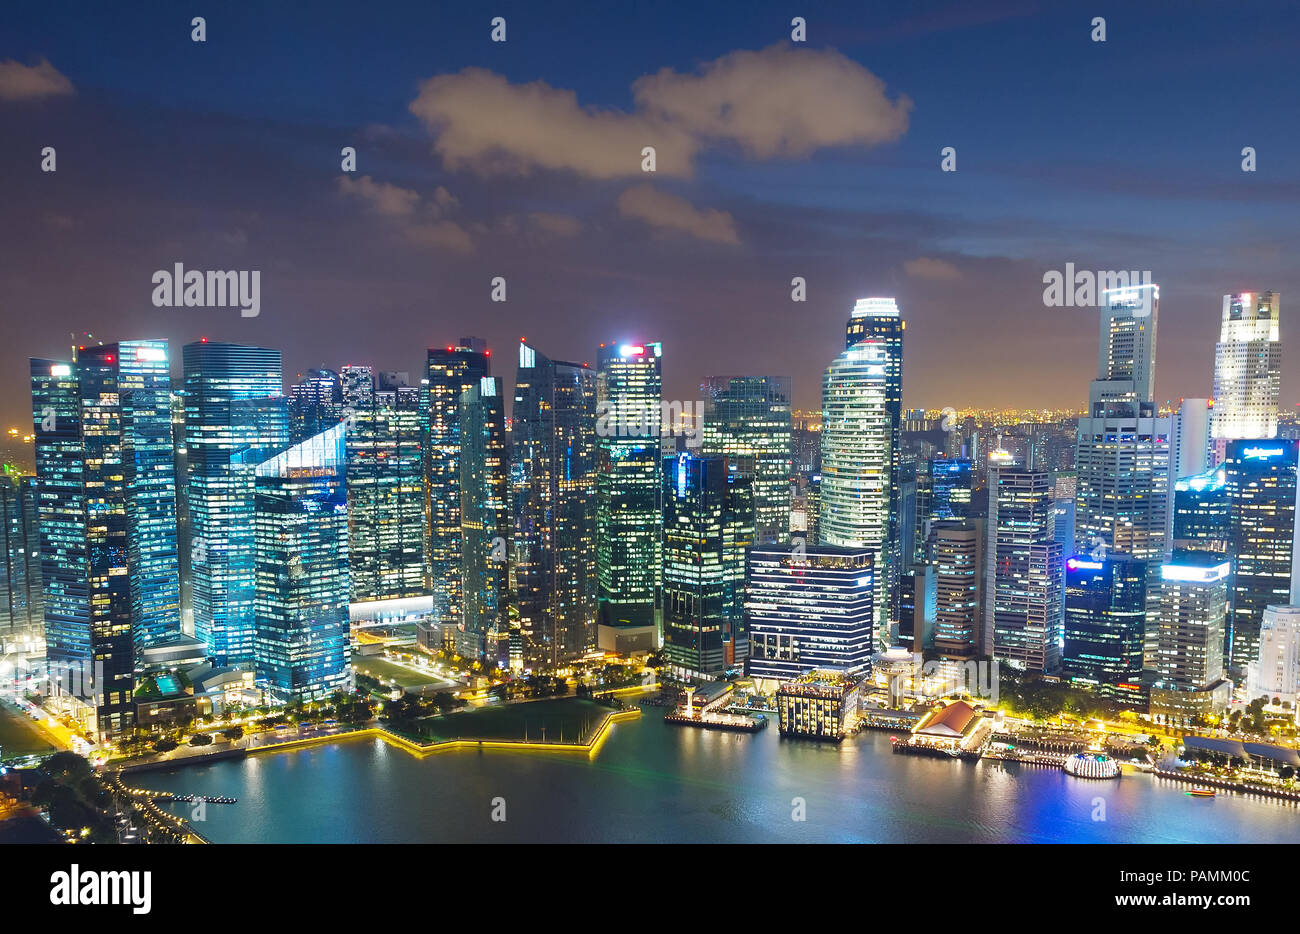 Skyline of Singapore Downtown at night. Aerial view Stock Photo